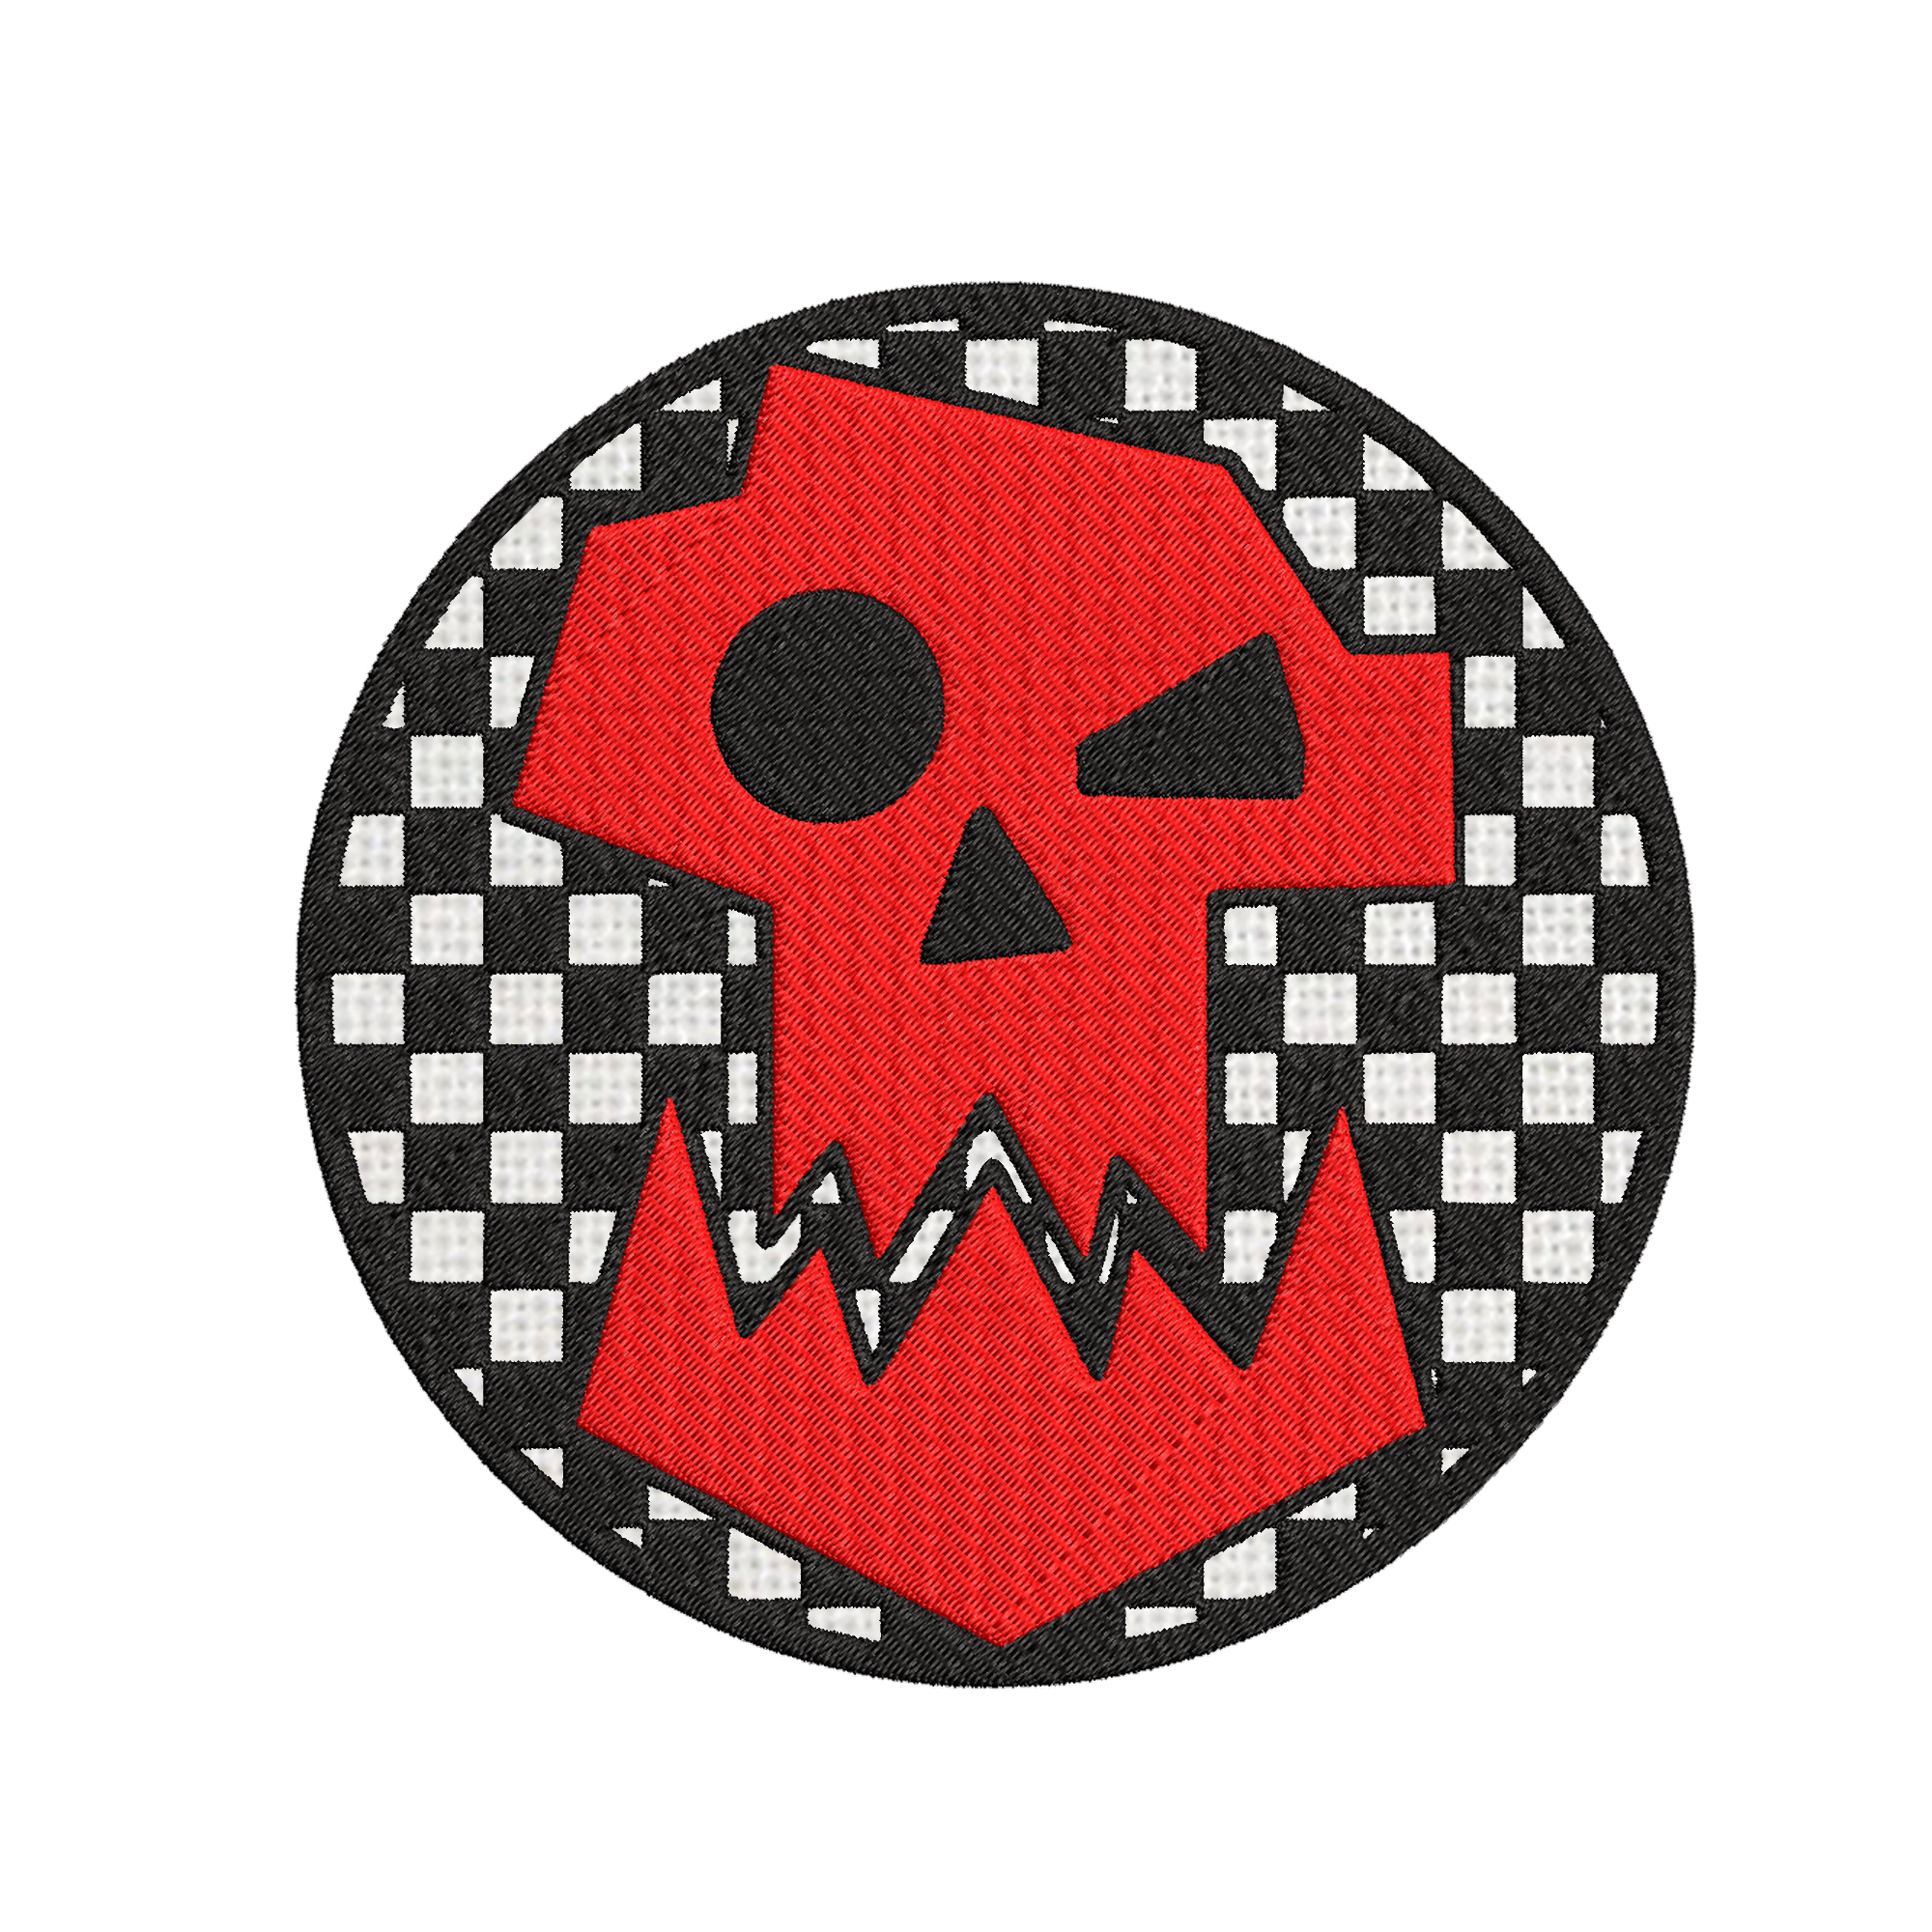 Orkz Warhammer 40k Embroidered Patch Iron-On Applique, Cosplay Vest Clothing Badge Back Packs Uniform, Geeks & Gamers, Table Top, Anime, Cartoon, Grim Dark DIY - image 1 of 1